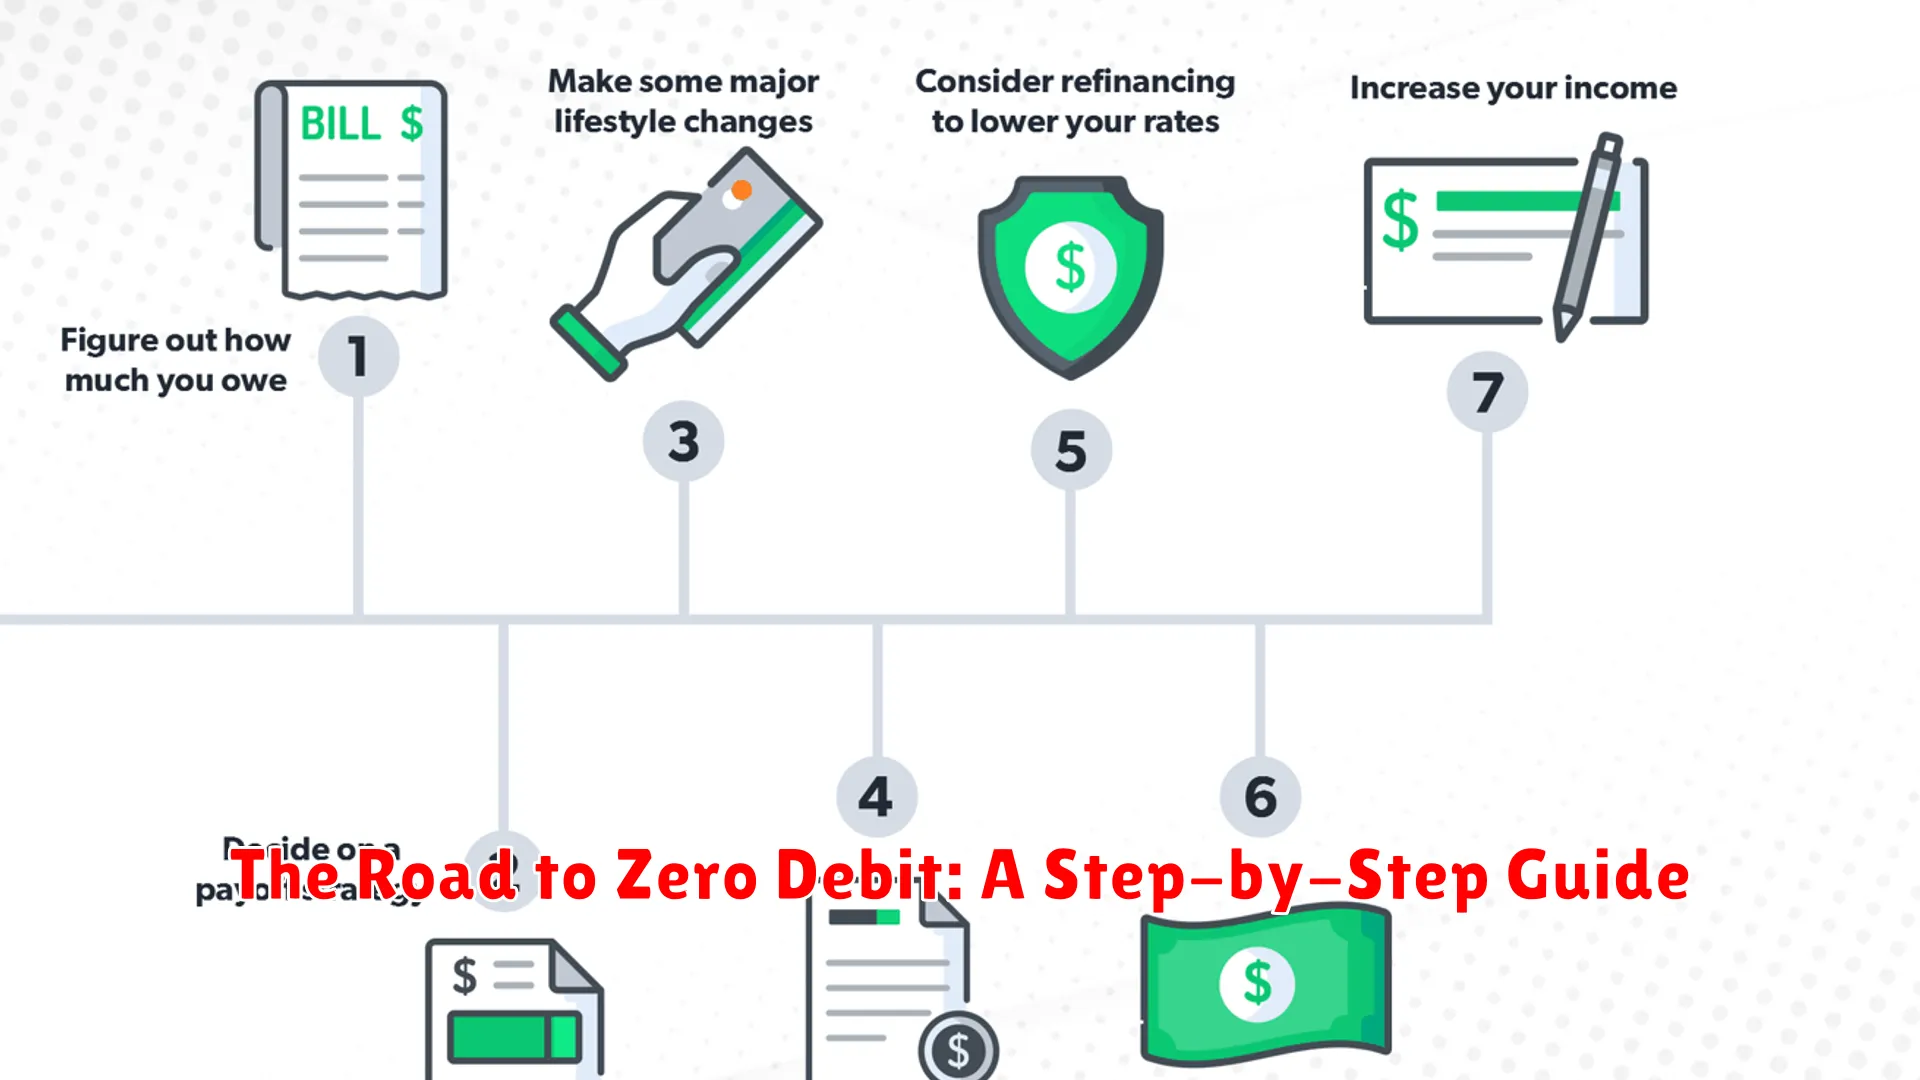 The Road to Zero Debit: A Step-by-Step Guide